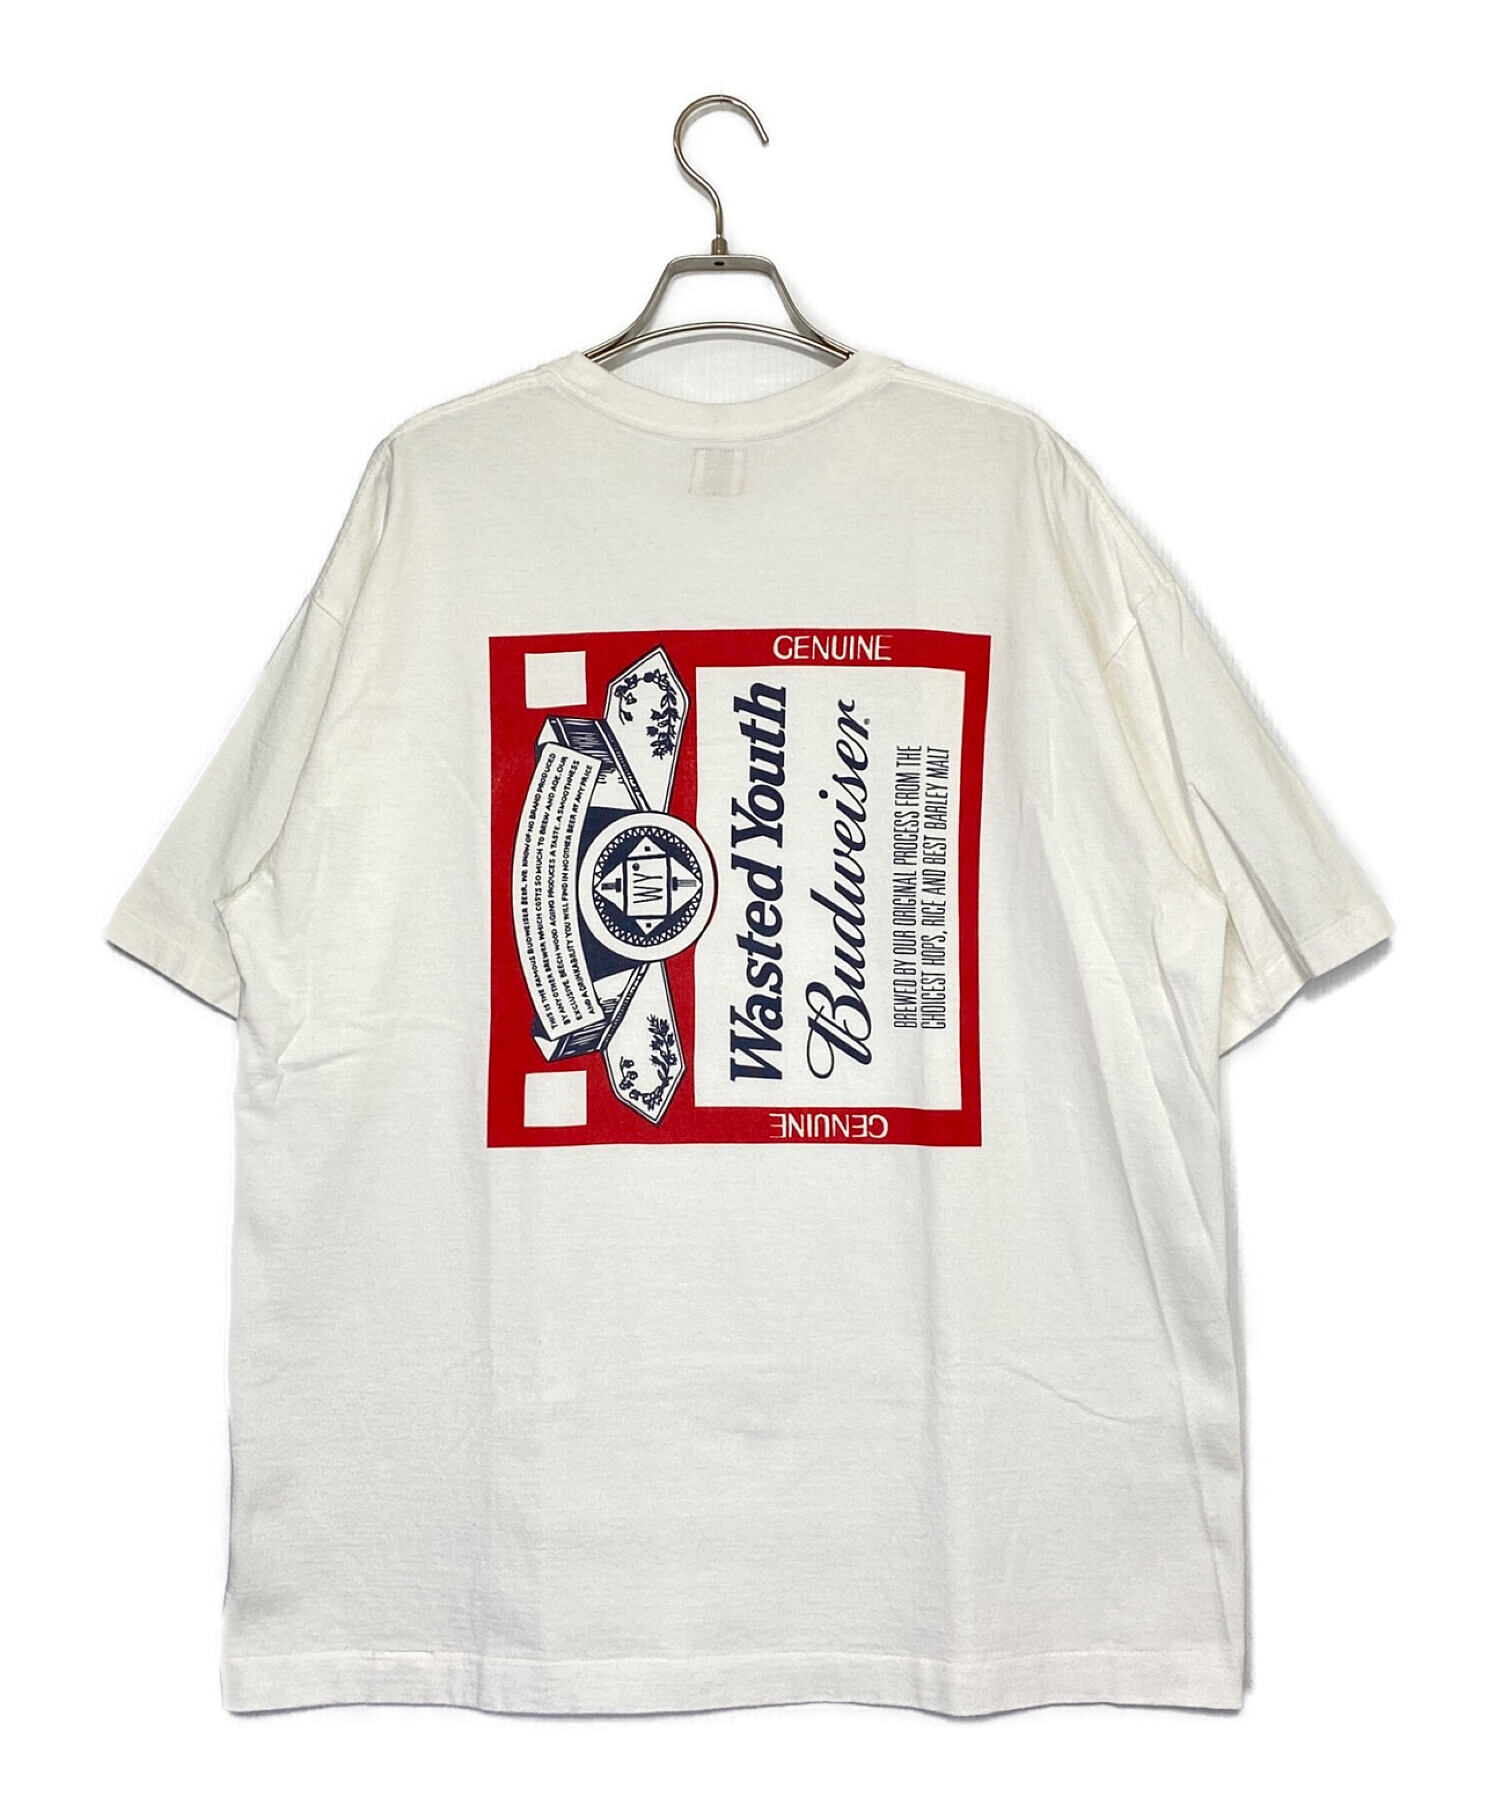 wasted youth tシャツ | kensysgas.com